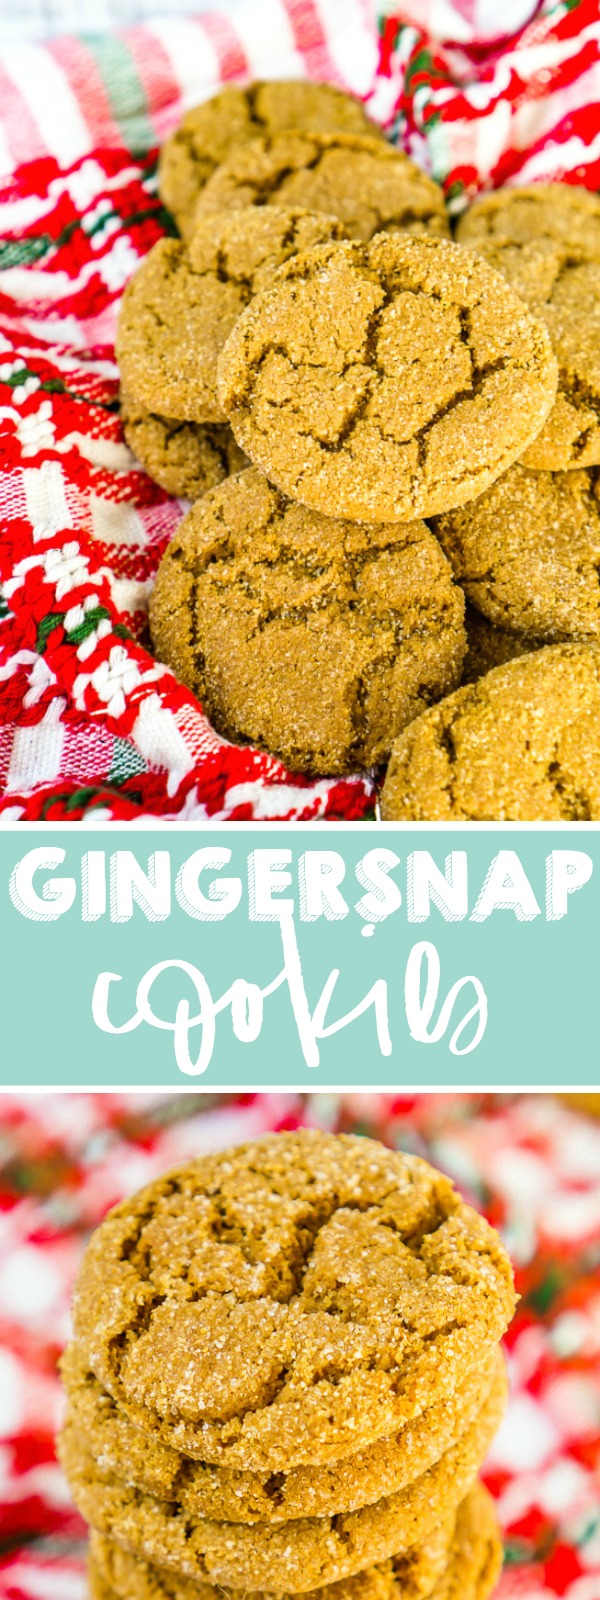 These Gingersnap Cookies are my favorite Christmas cookie! Soft, spiced cookies with rich molasses and a cracked, sugar top, these gingersnaps will be a hit all holiday season alongside hot cocoa, coffee, ice cream and more! | THE LOVE NERDS